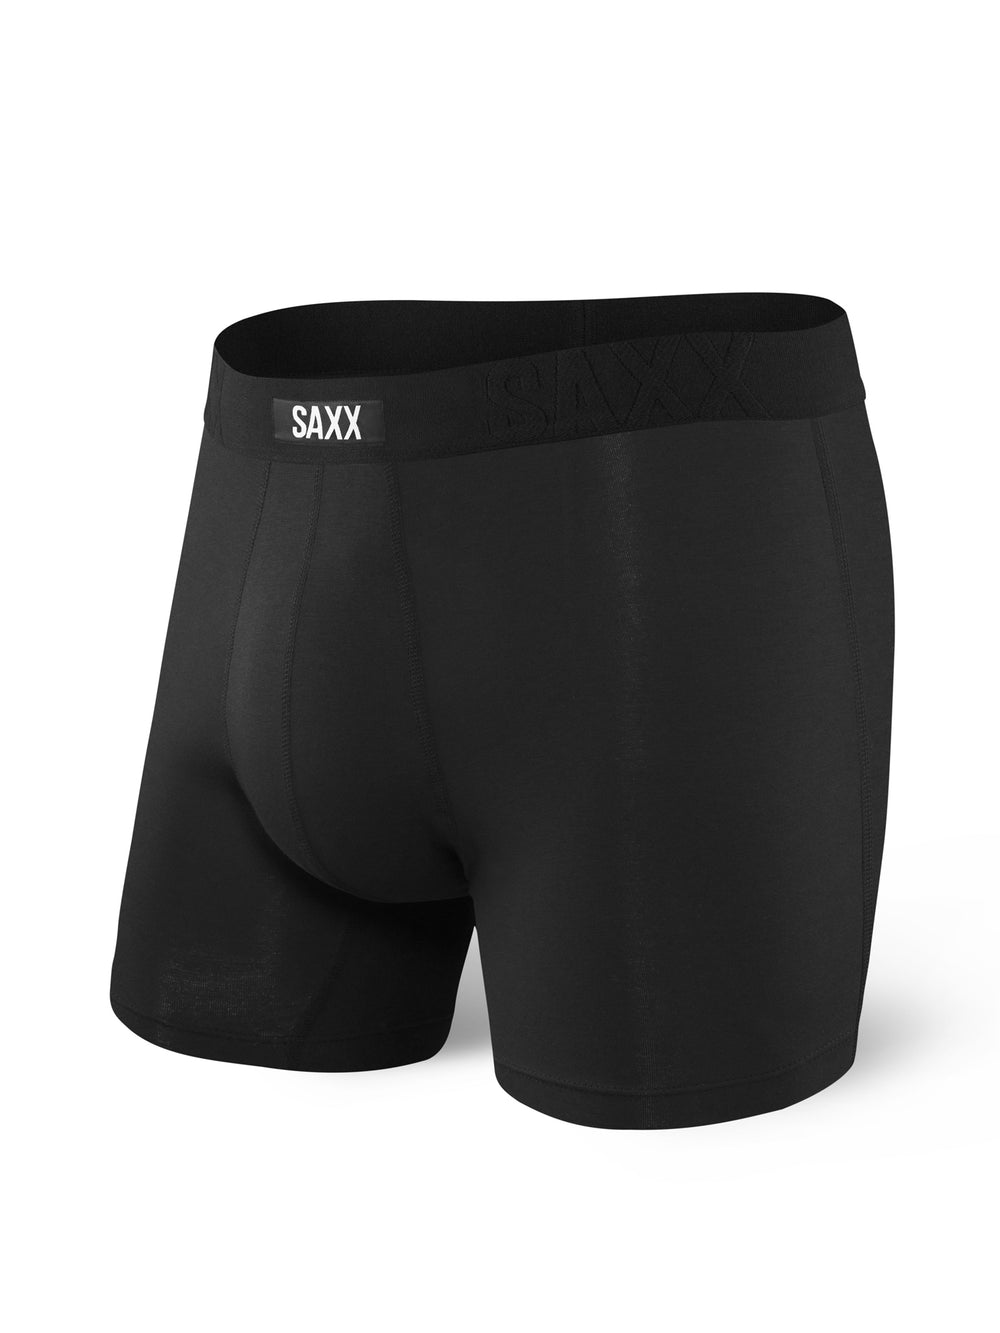 SAXX UNDERCOVER BOXER BRIEF  - CLEARANCE